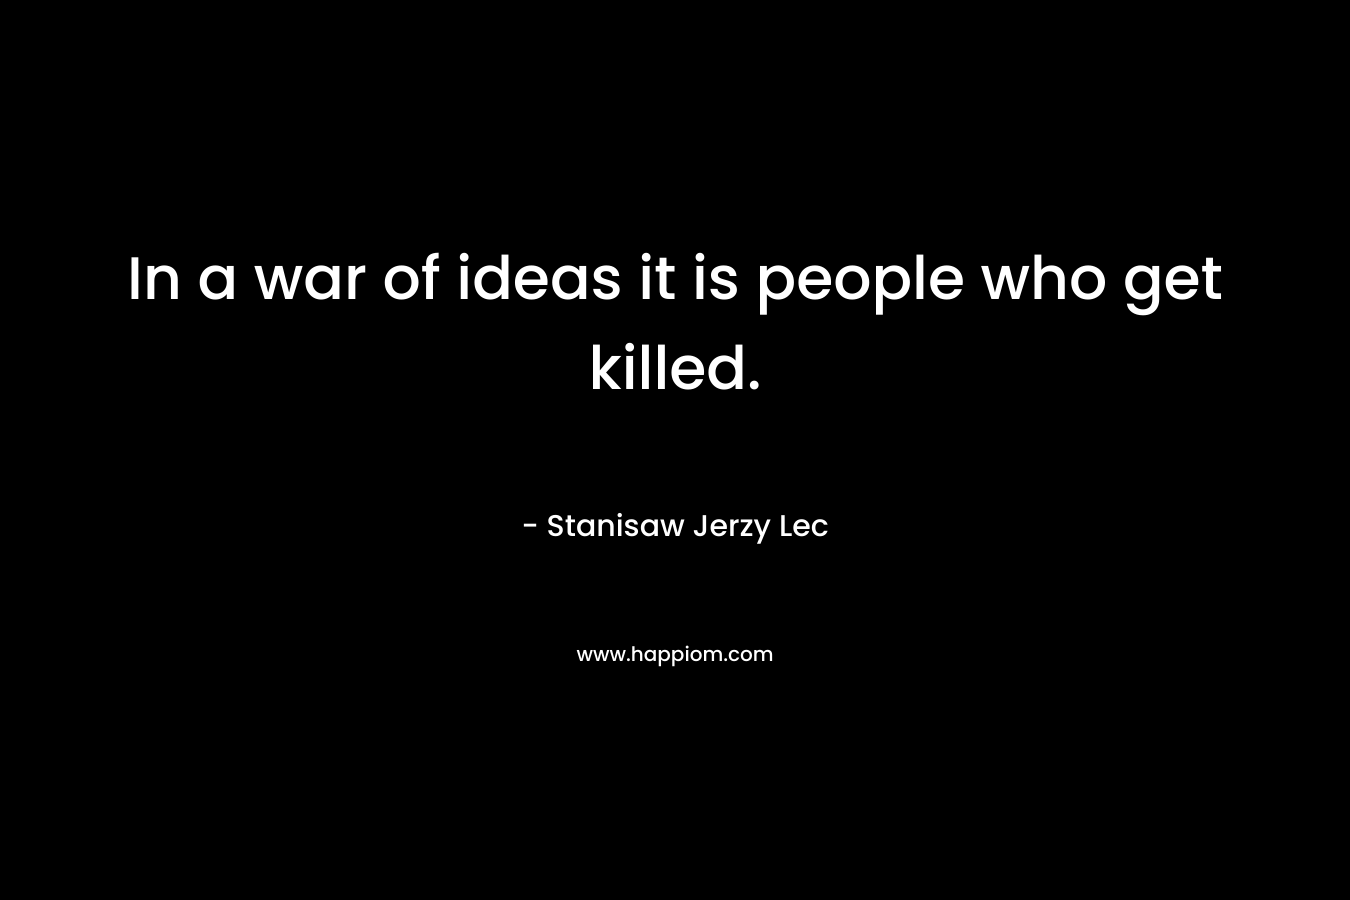 In a war of ideas it is people who get killed.